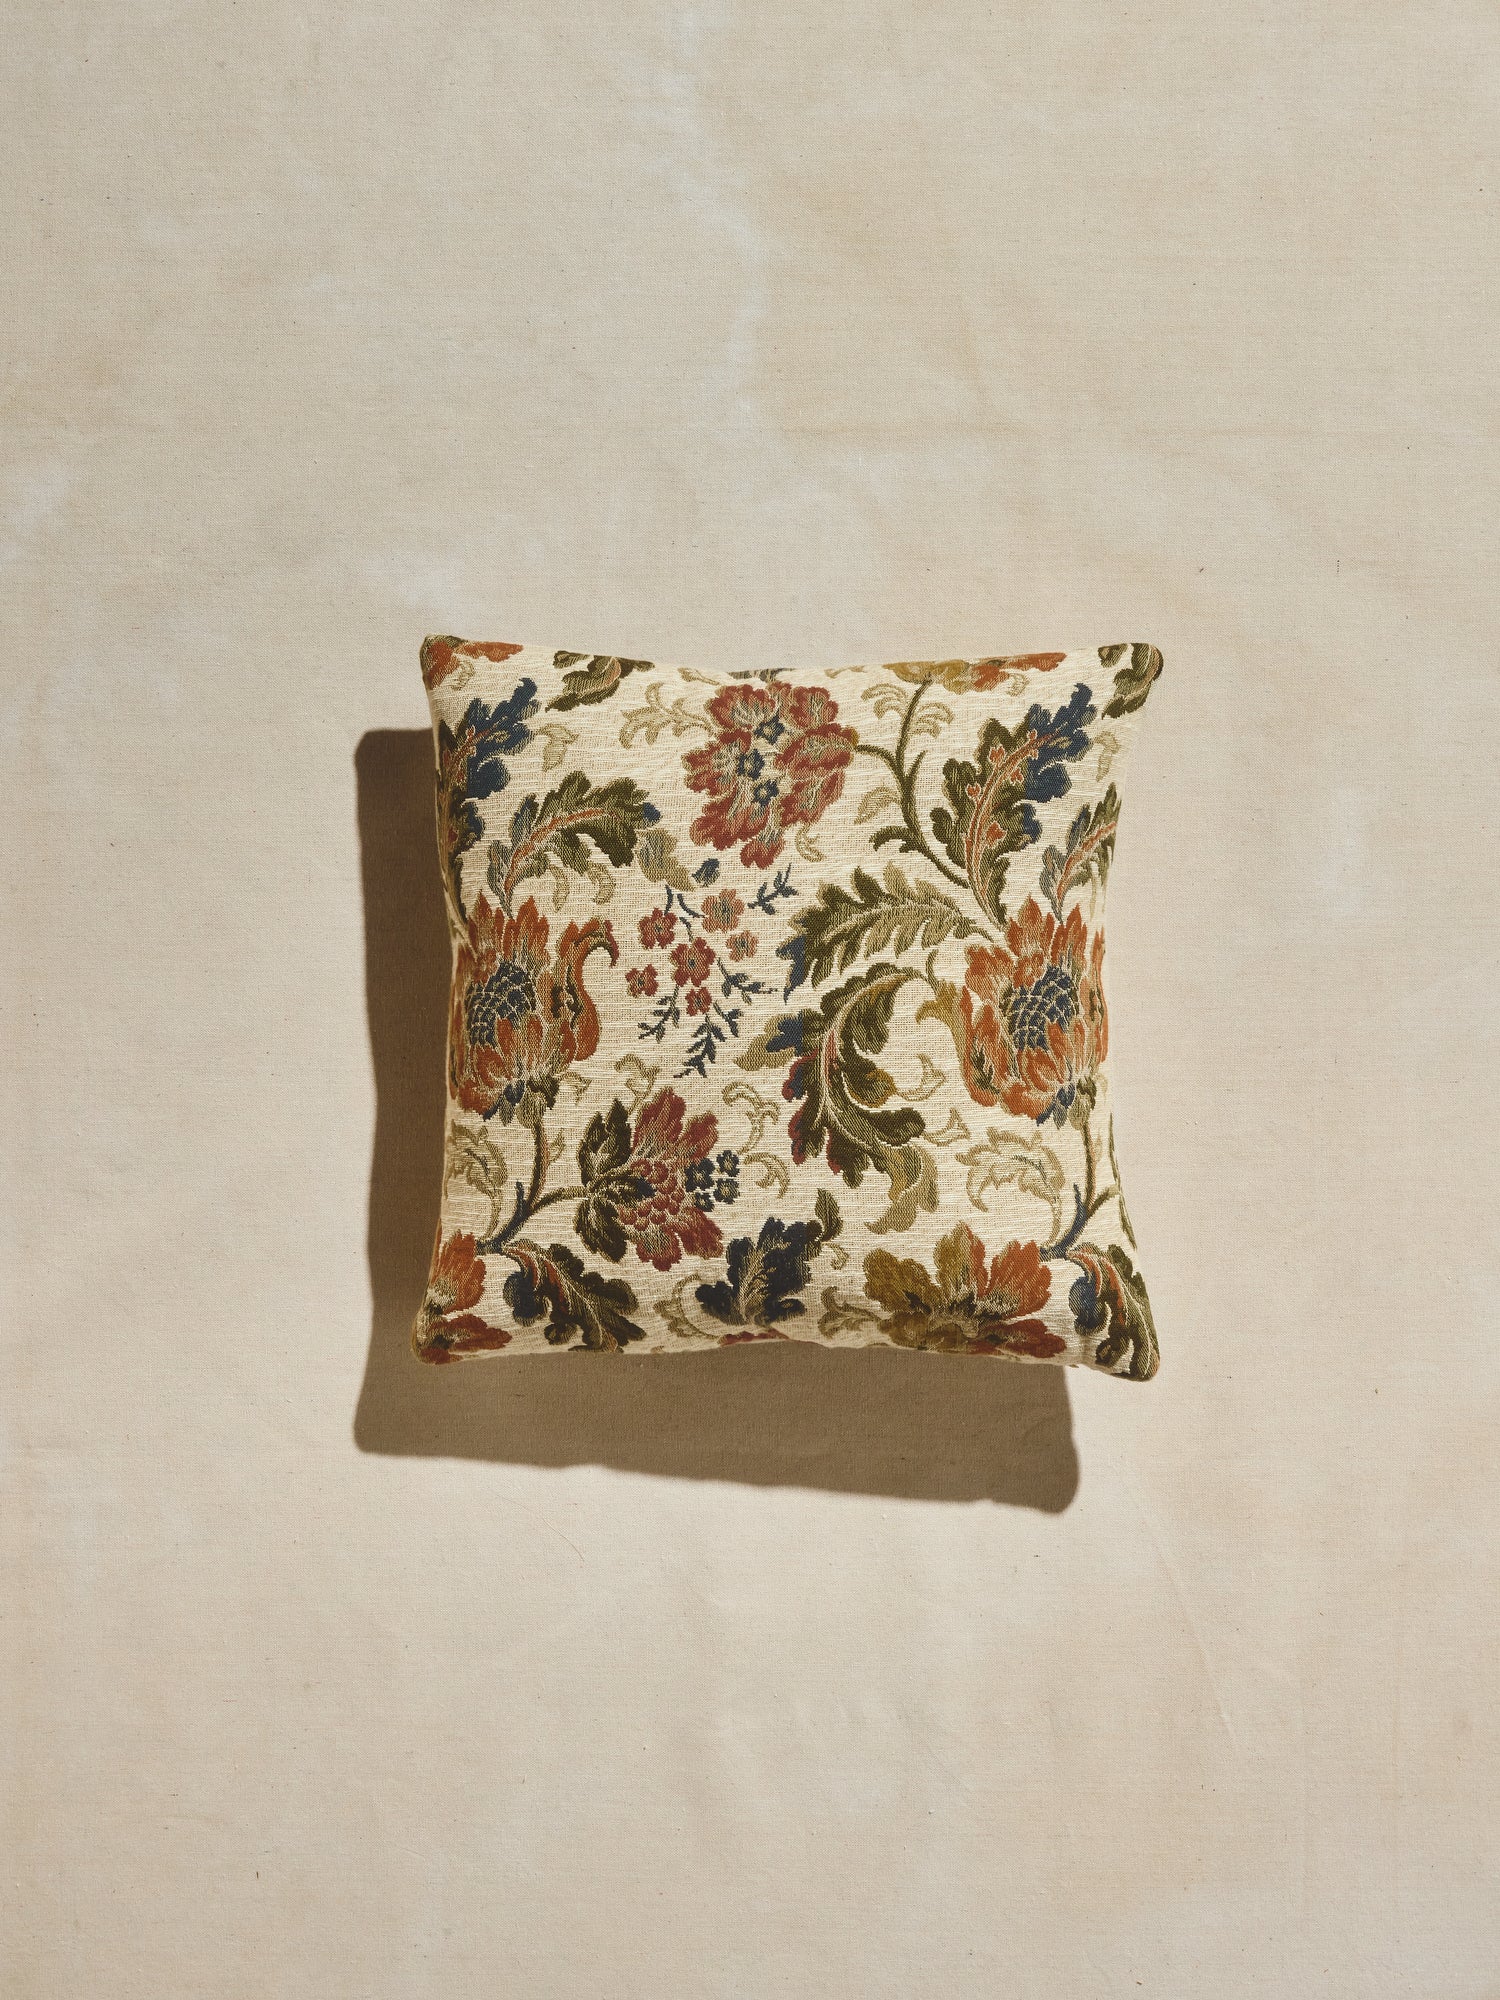 Vintage style floral pattern on our woven square Primavera pillow and down feather blend insert.